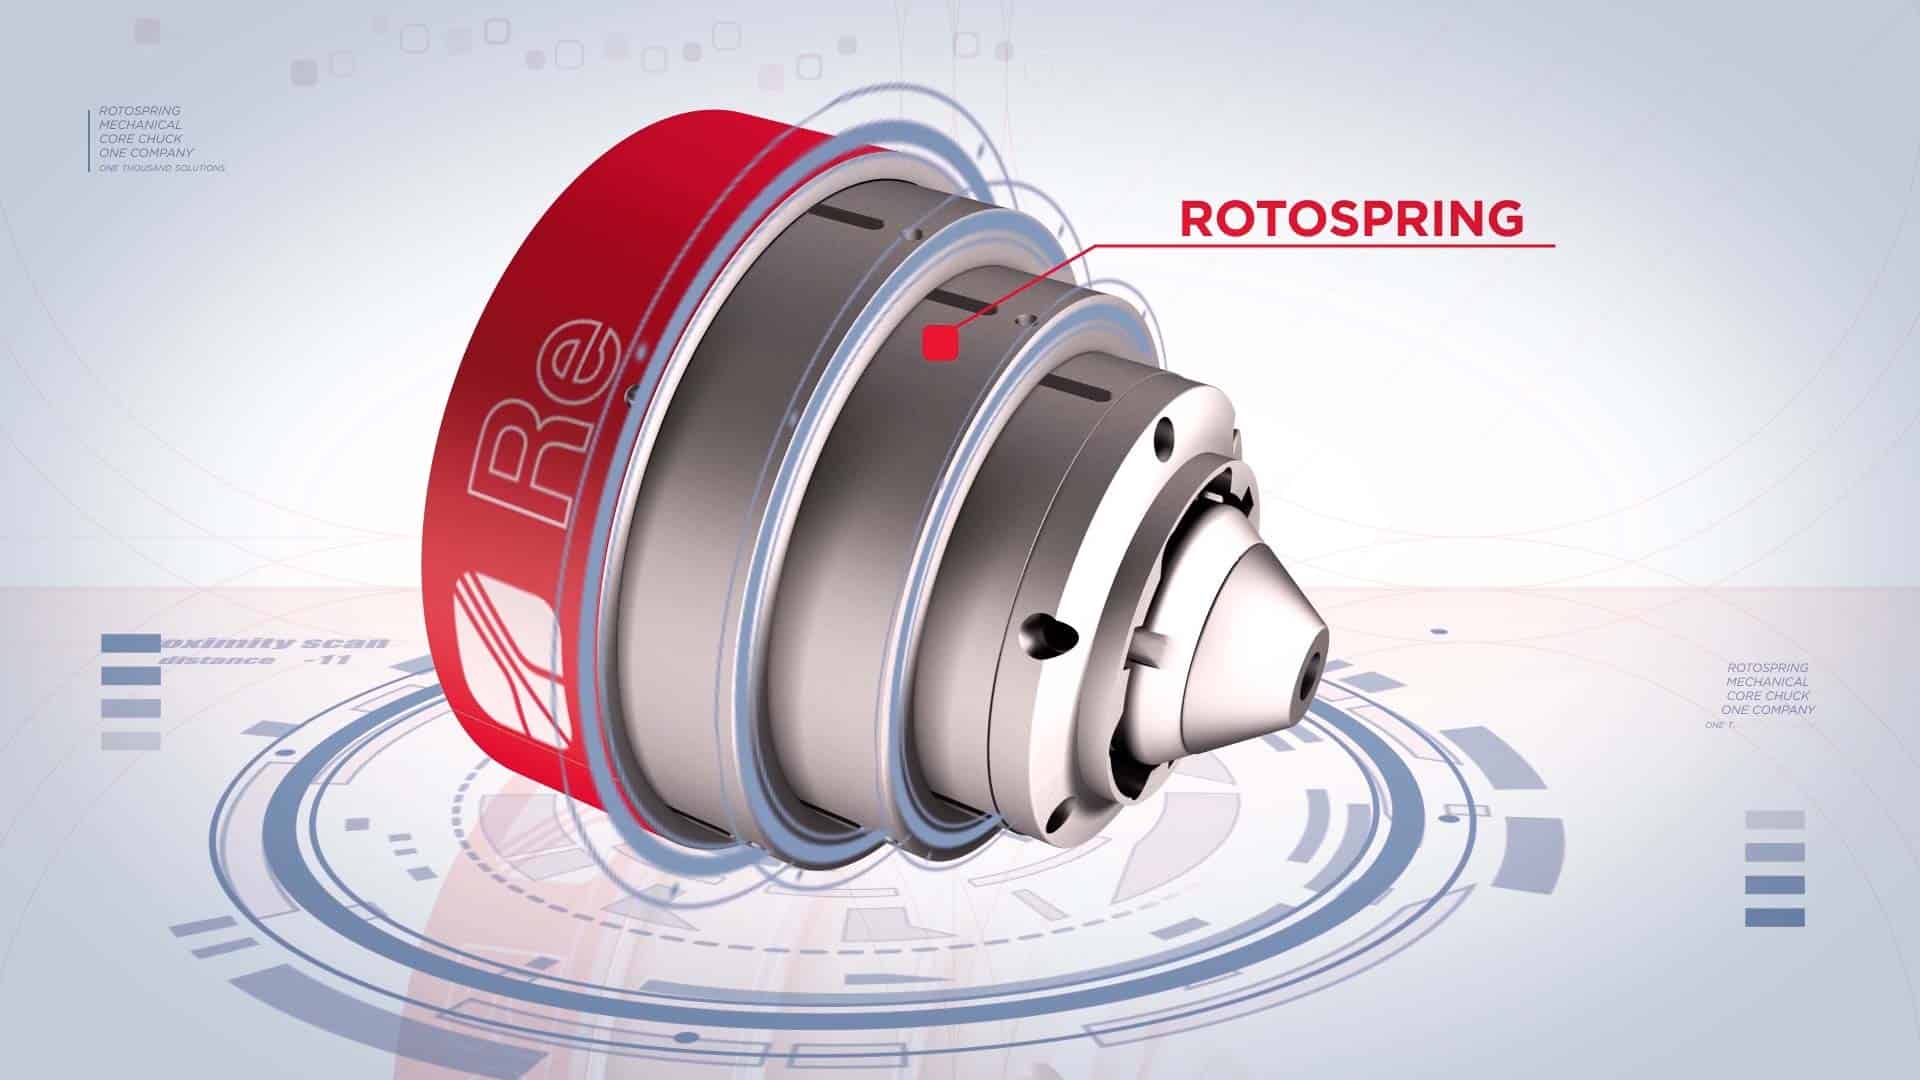 Re rotospring video aziendale corporate